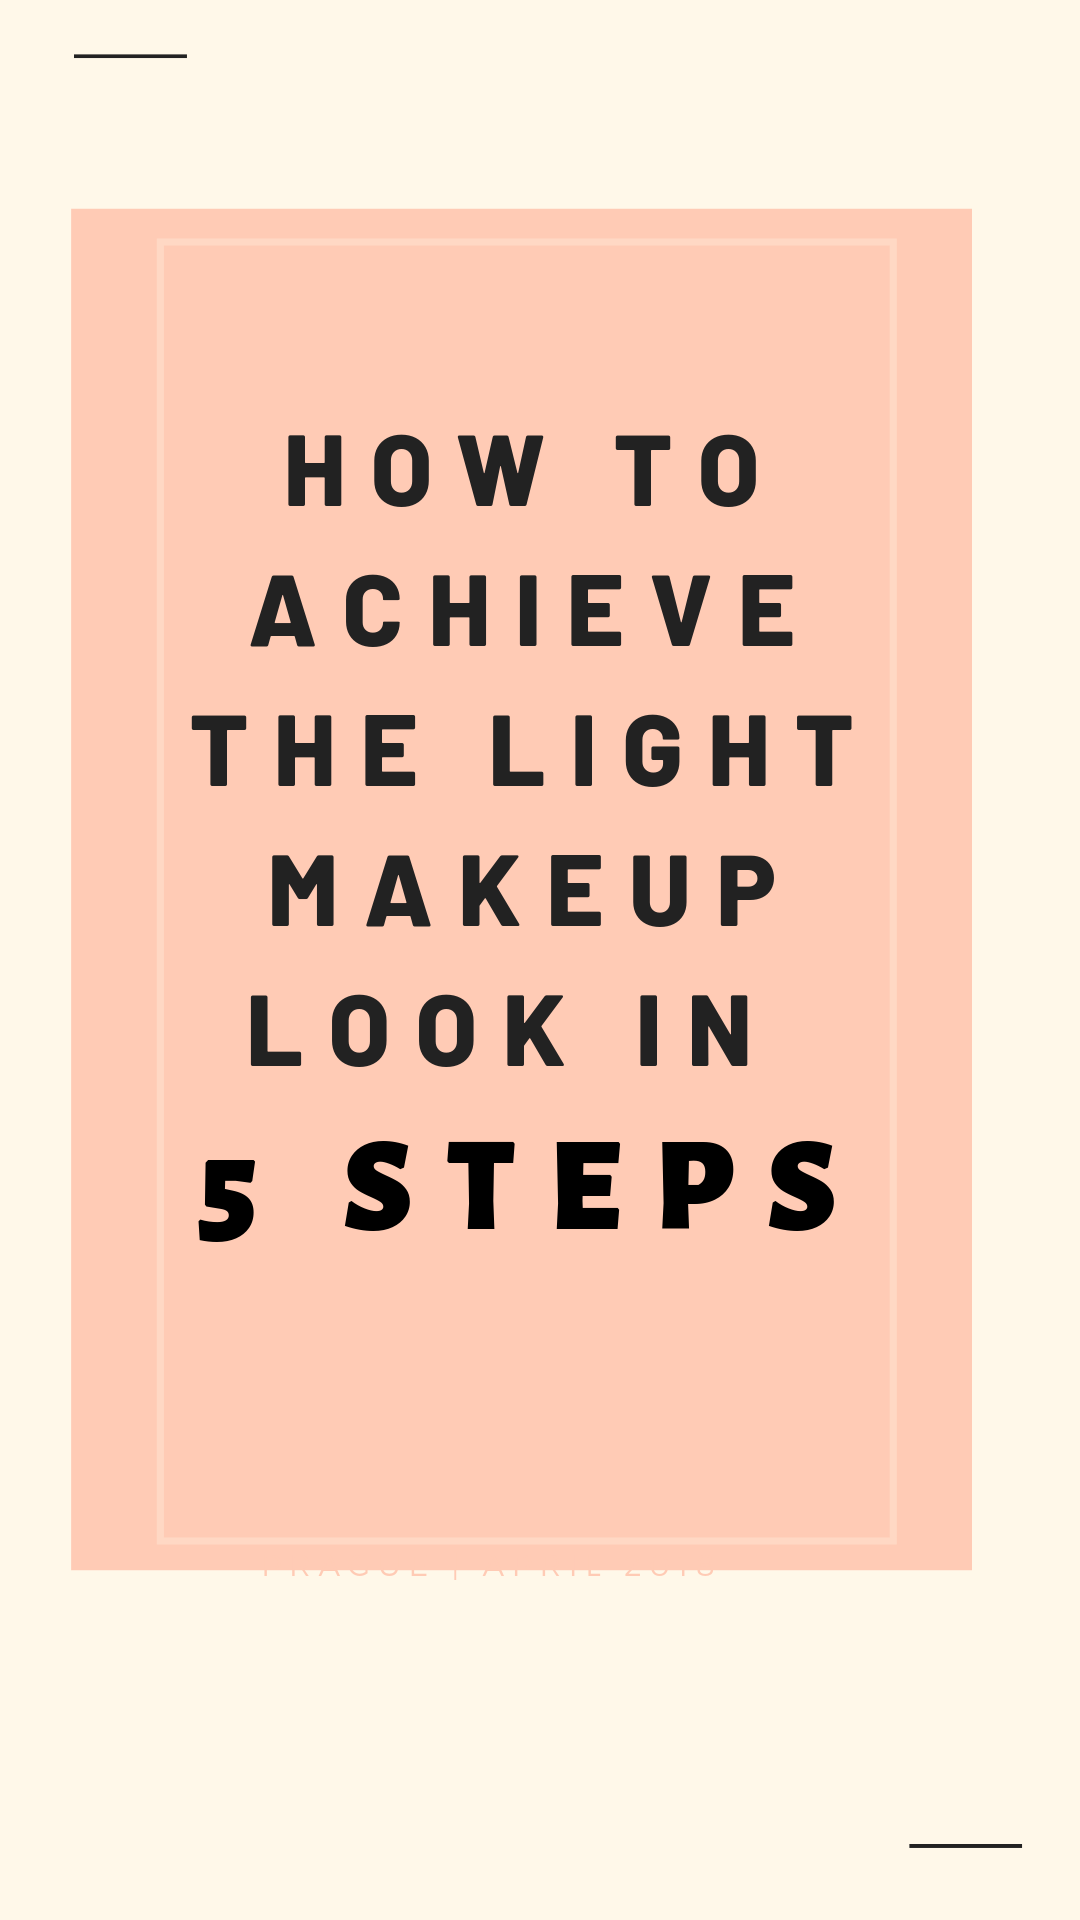 How to achieve the light makeup look in 5 steps